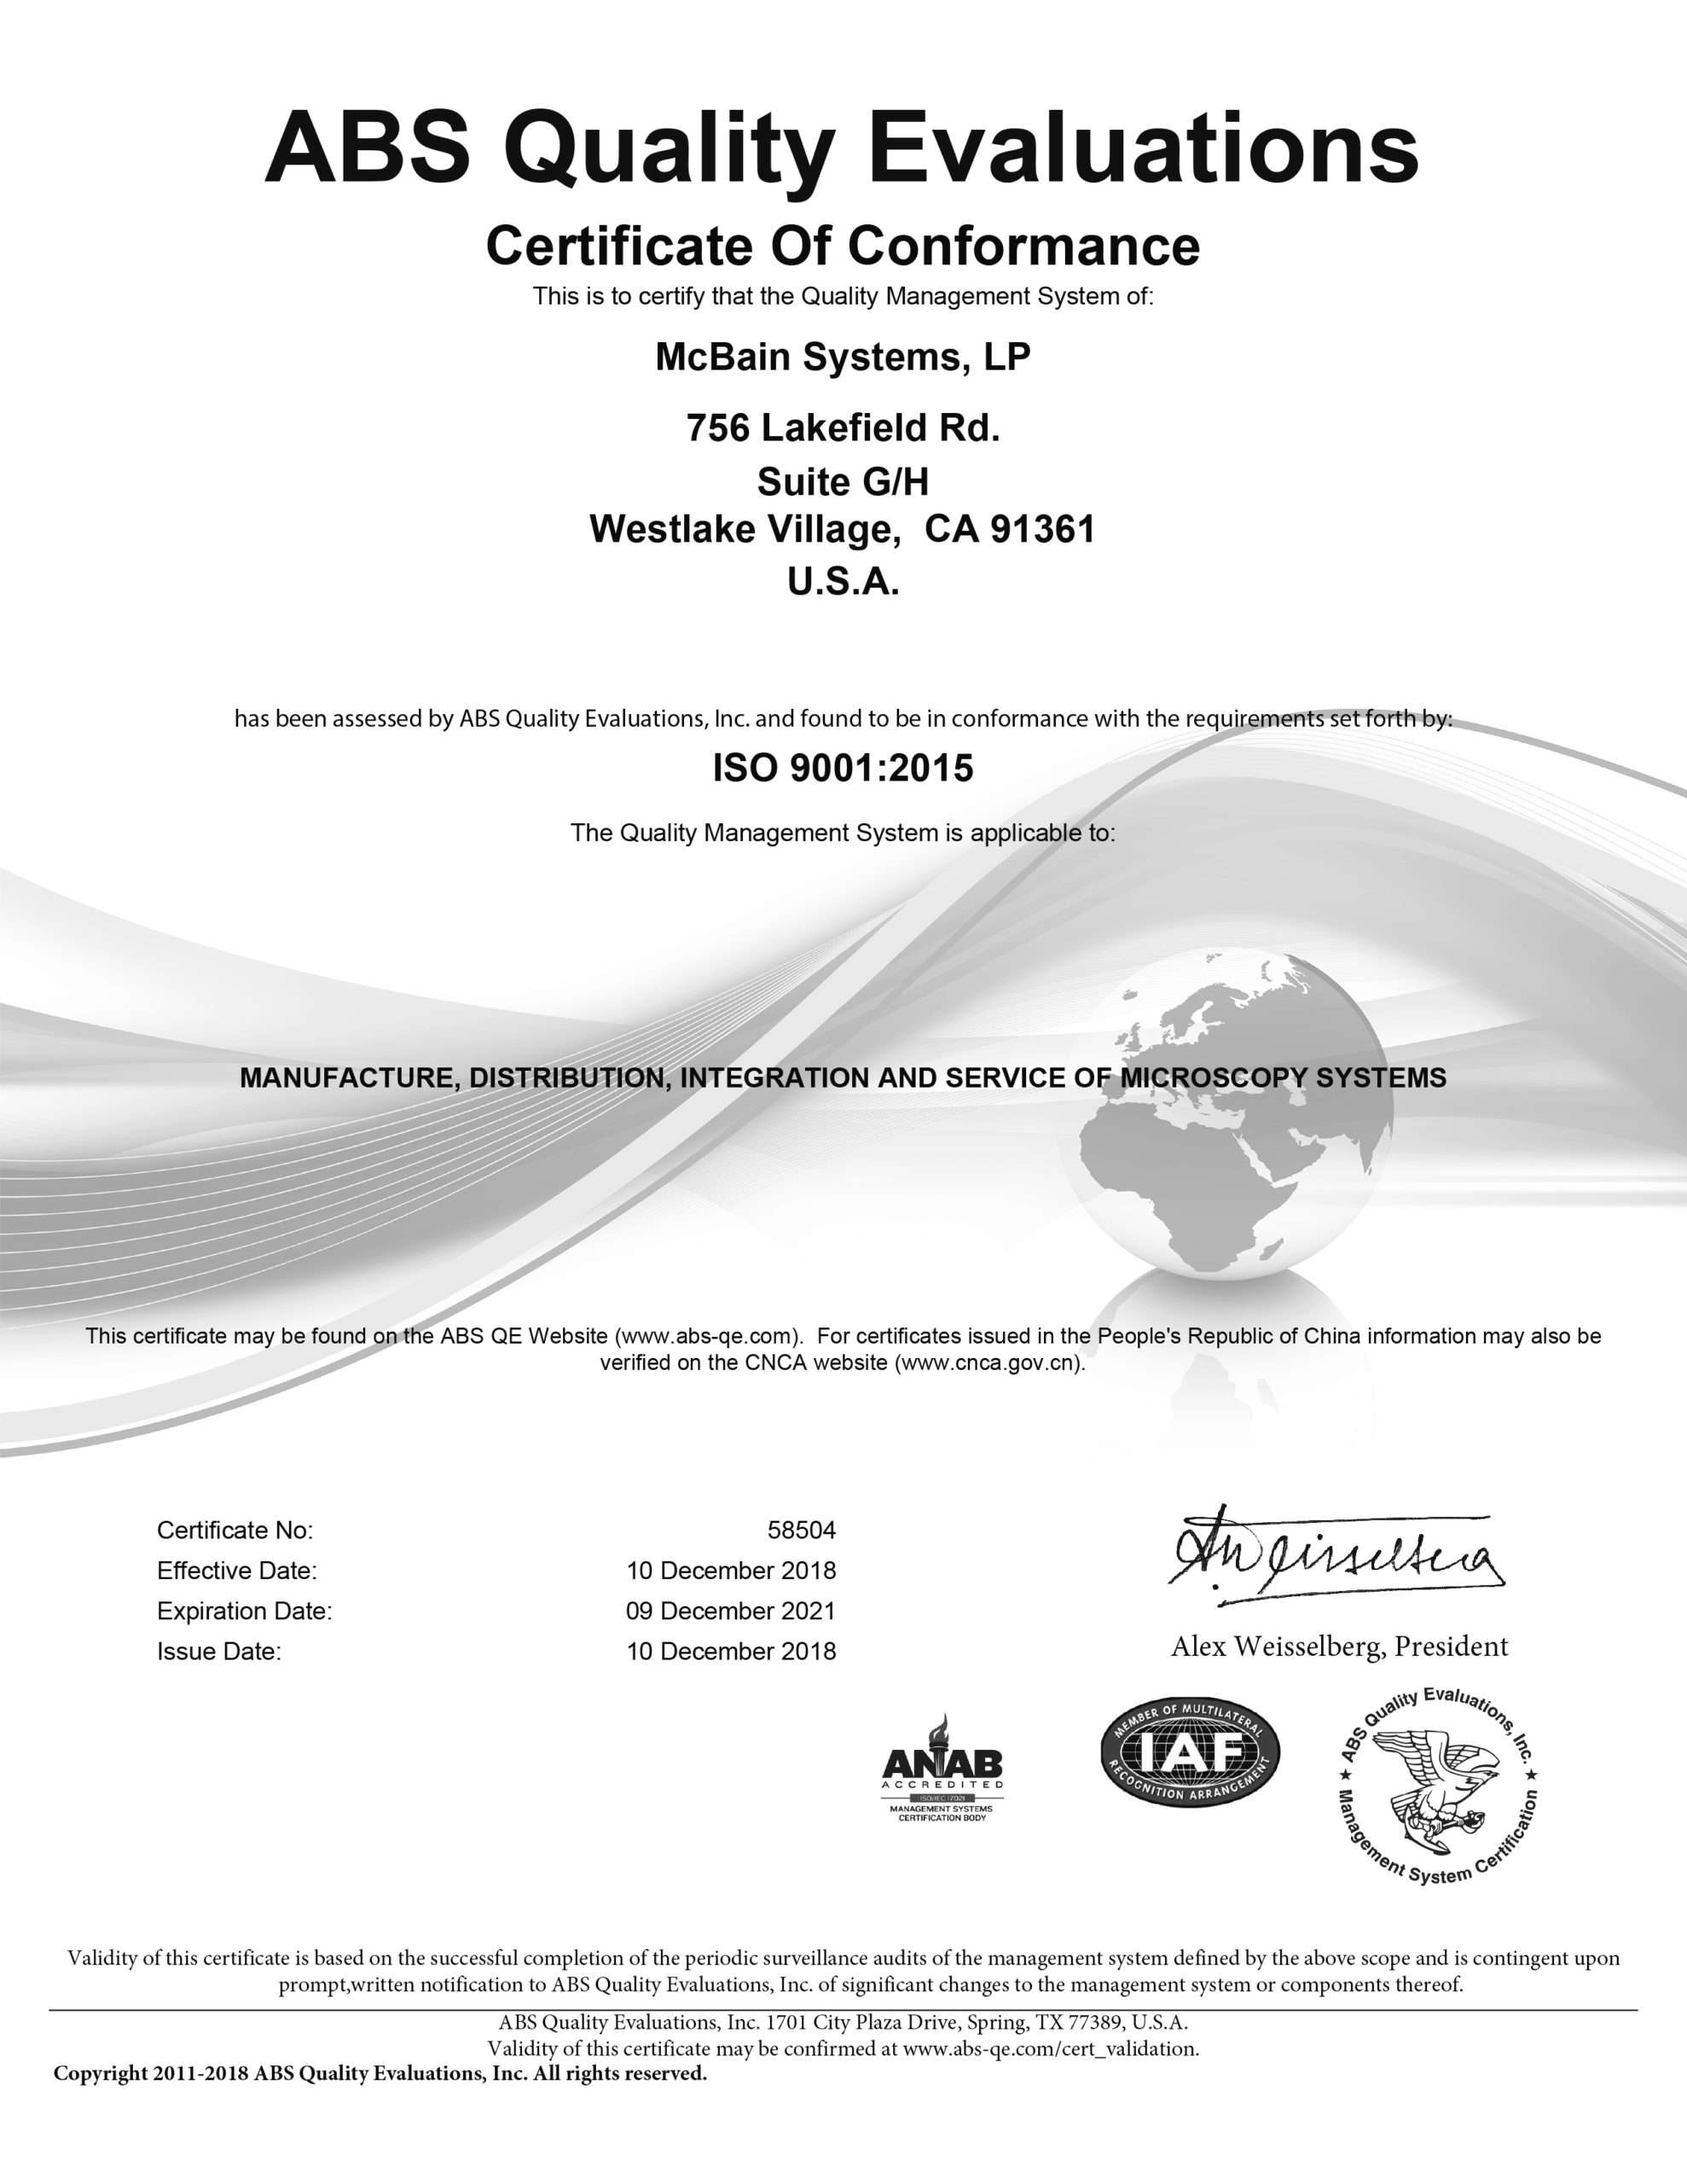 ISO 9001:2015 Certification PDF McBain Systems